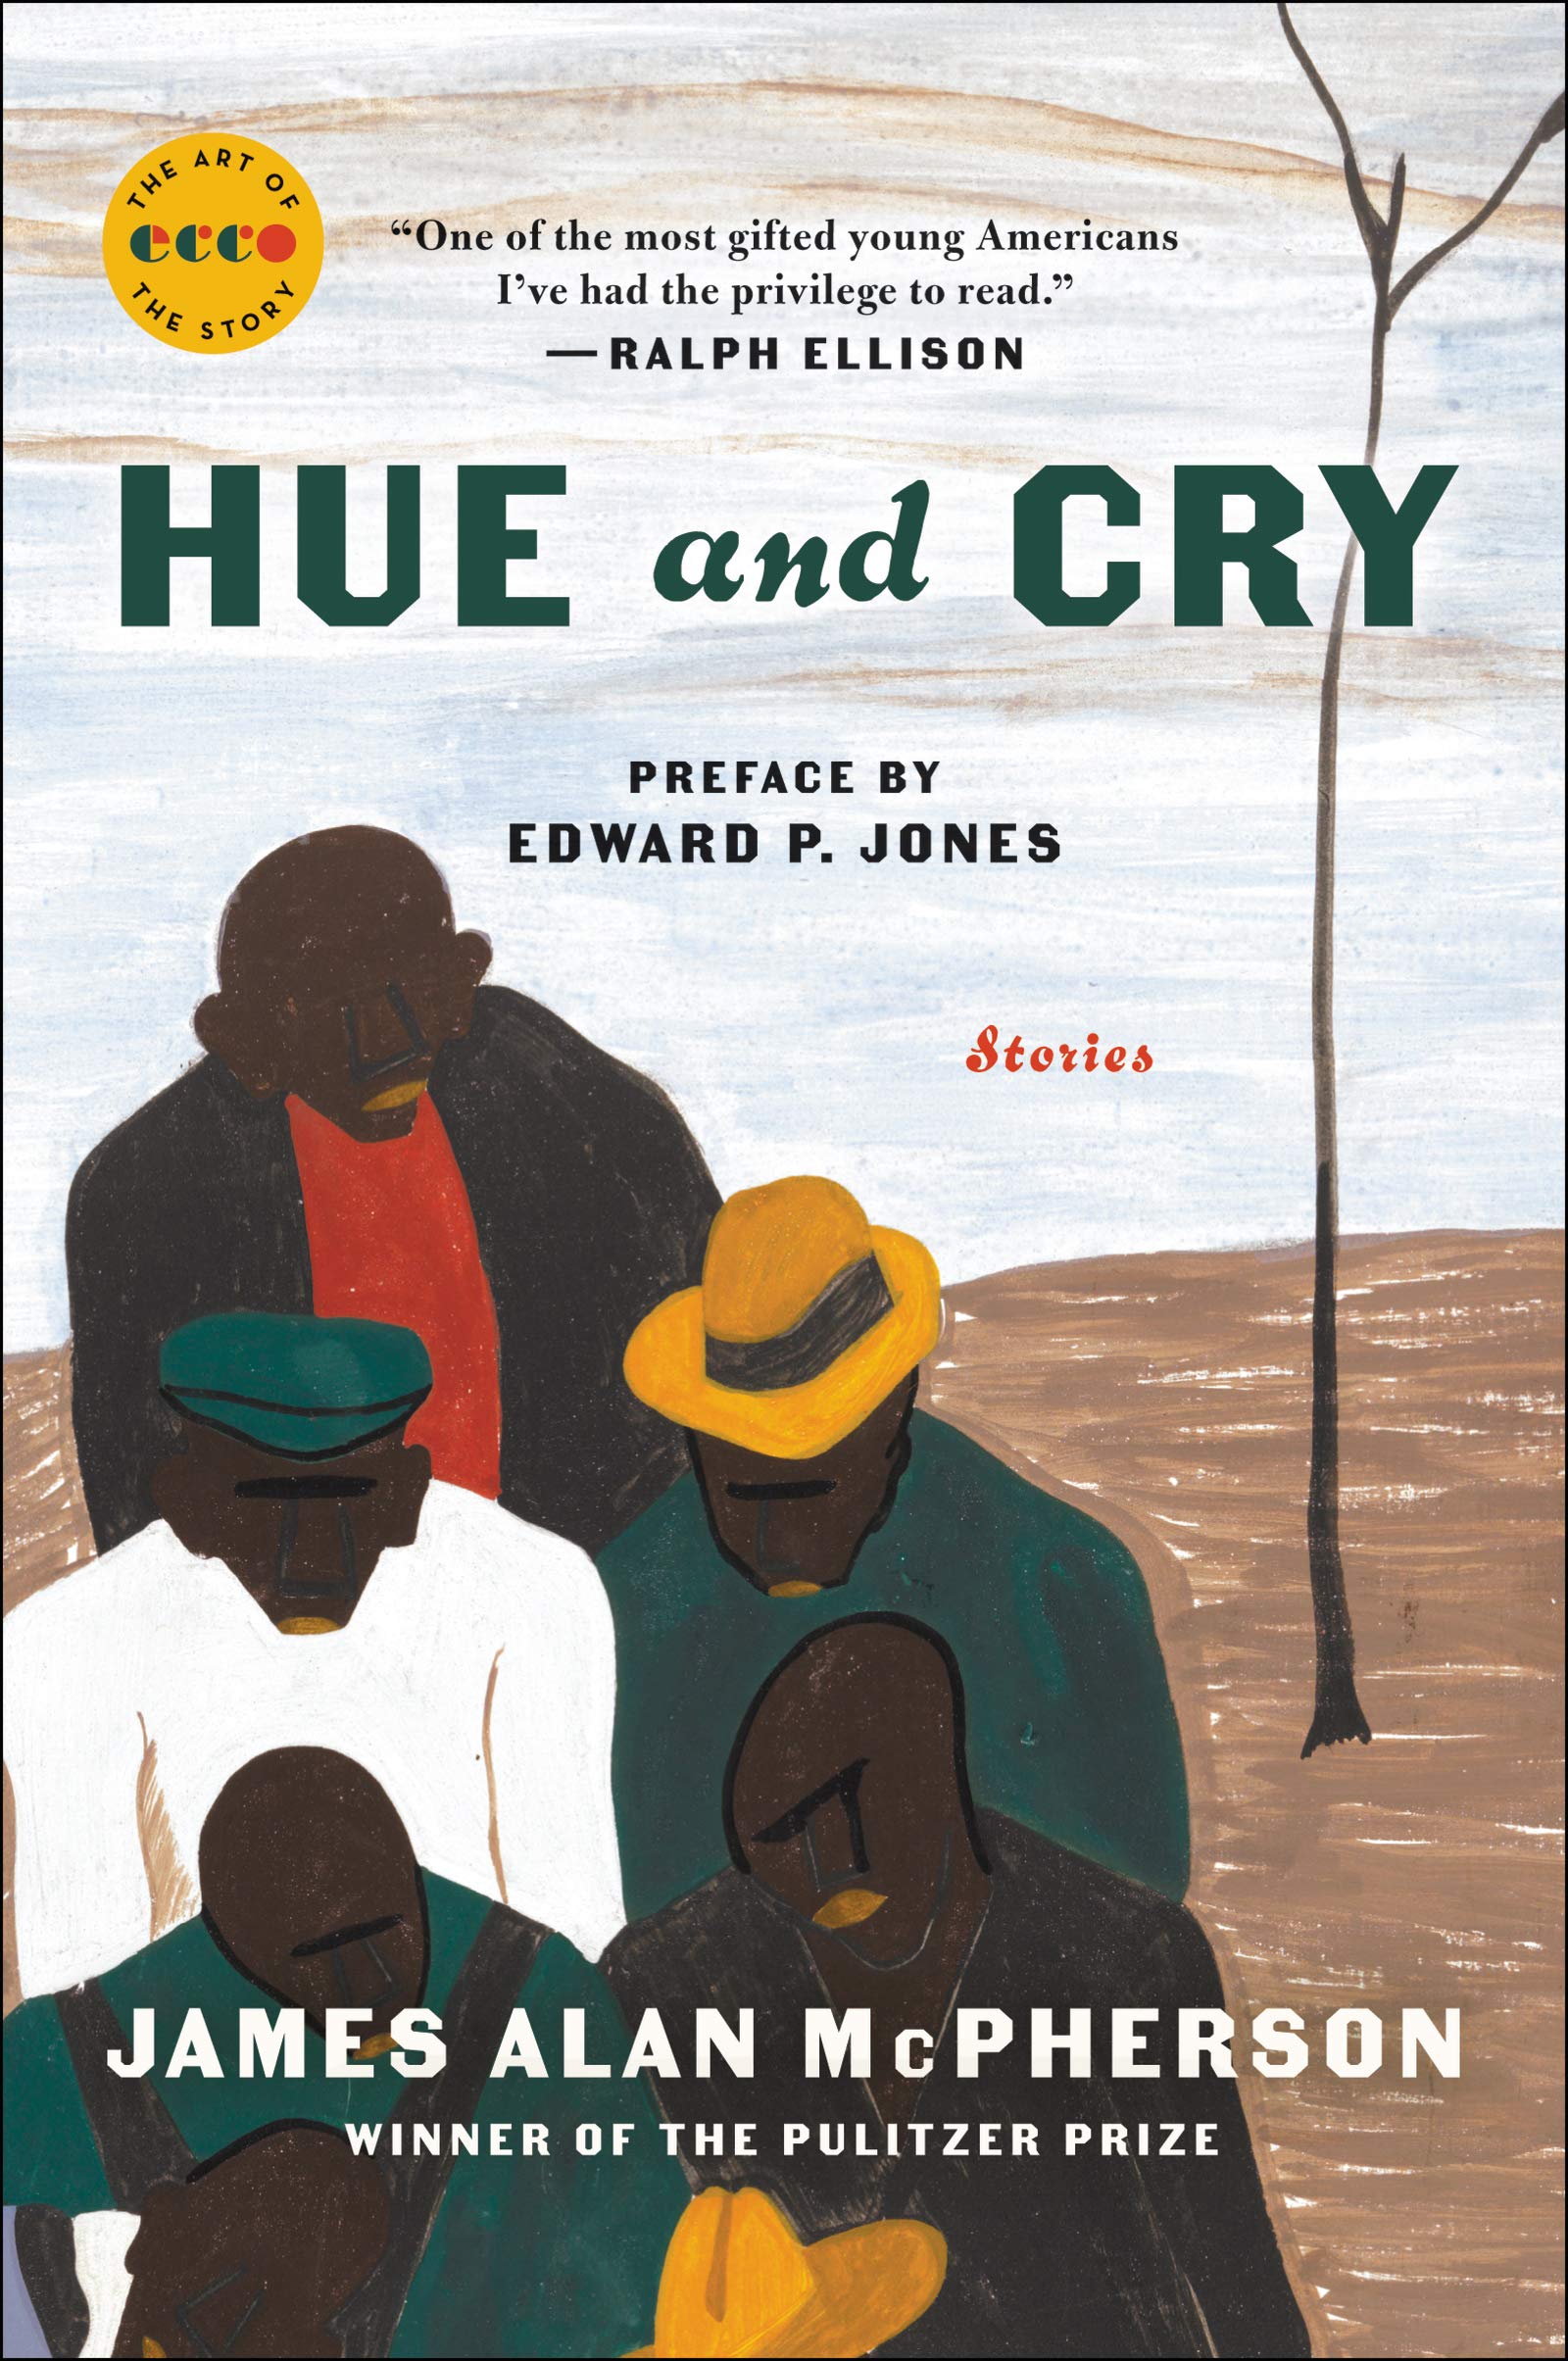 Hue and Cry: Short Stories